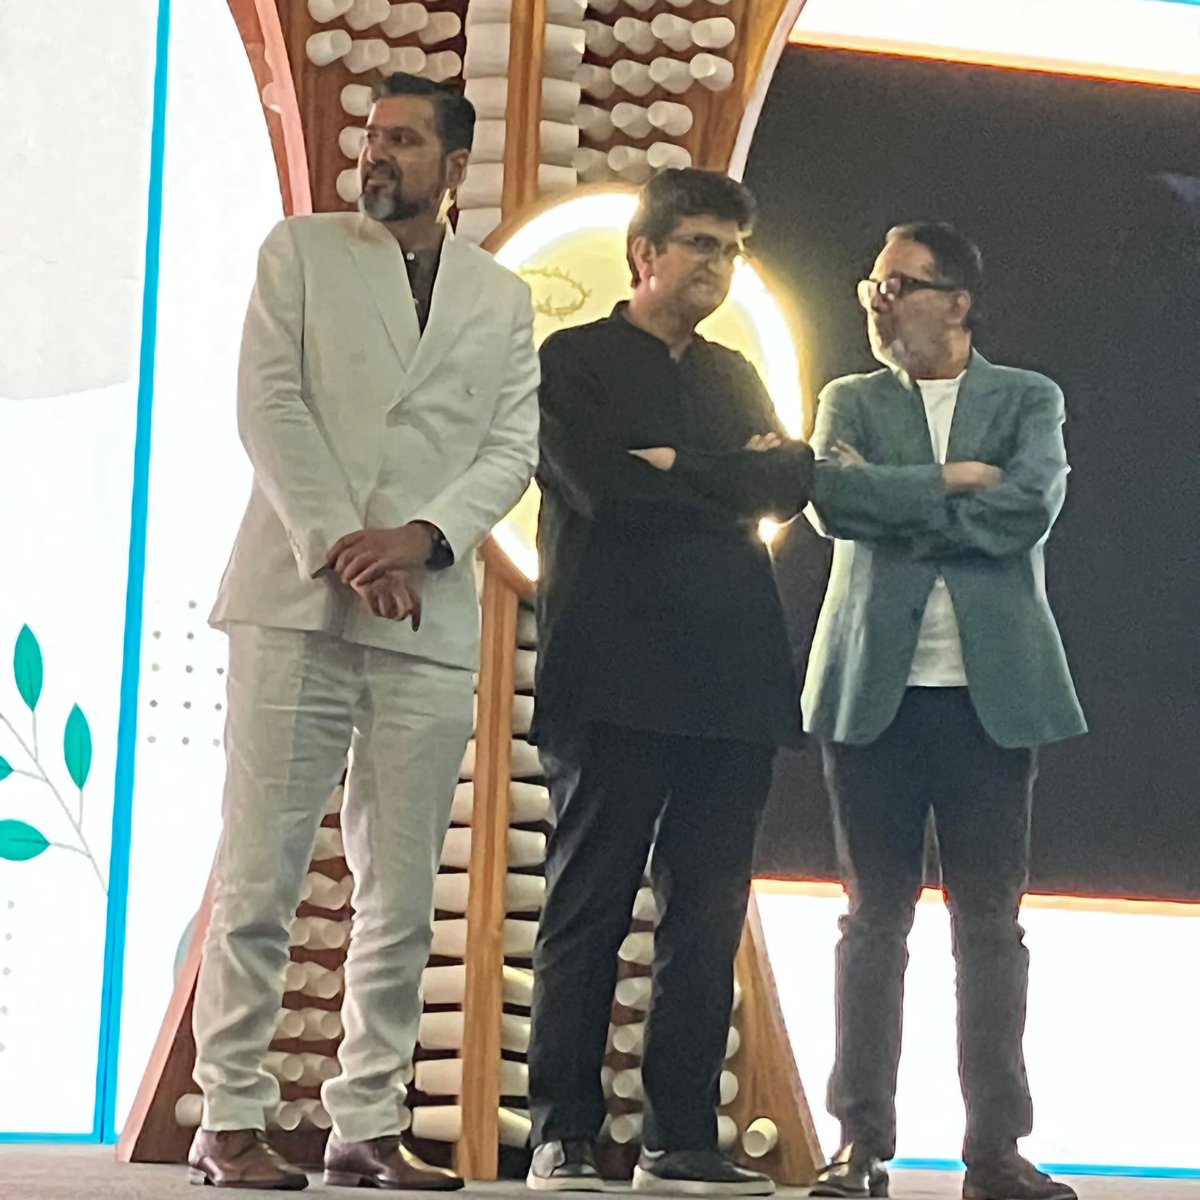 A person who is an absolute inspiration, someone I deeply admire - since the beginning of my professional music career @prasoonjoshi_. Honored to call him a friend :-) At the IAA Olive Crown Awards last evening in Mumbai. Great evening celebrating Environmental Sustainability.